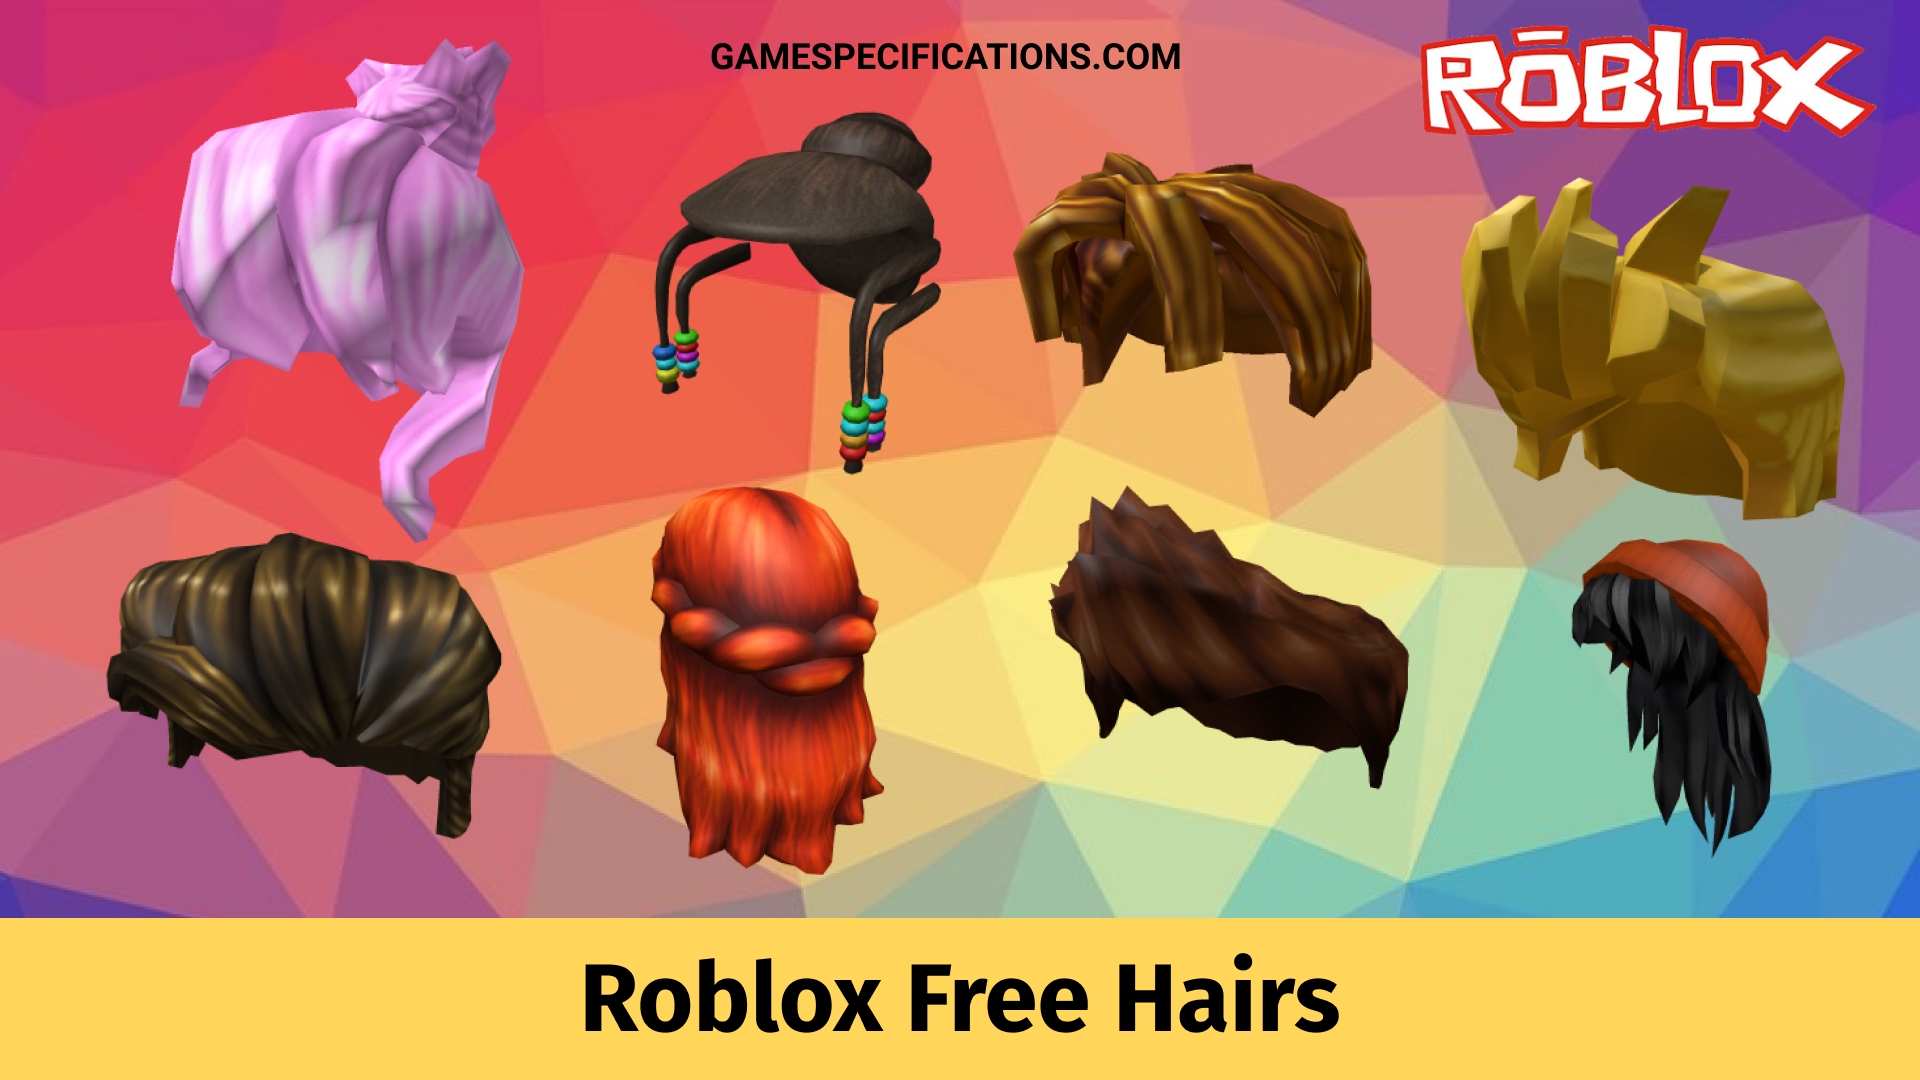 Roblox Free Hairs For Awesome Aesthetics Game Specifications - roblox power armor helmet ugc